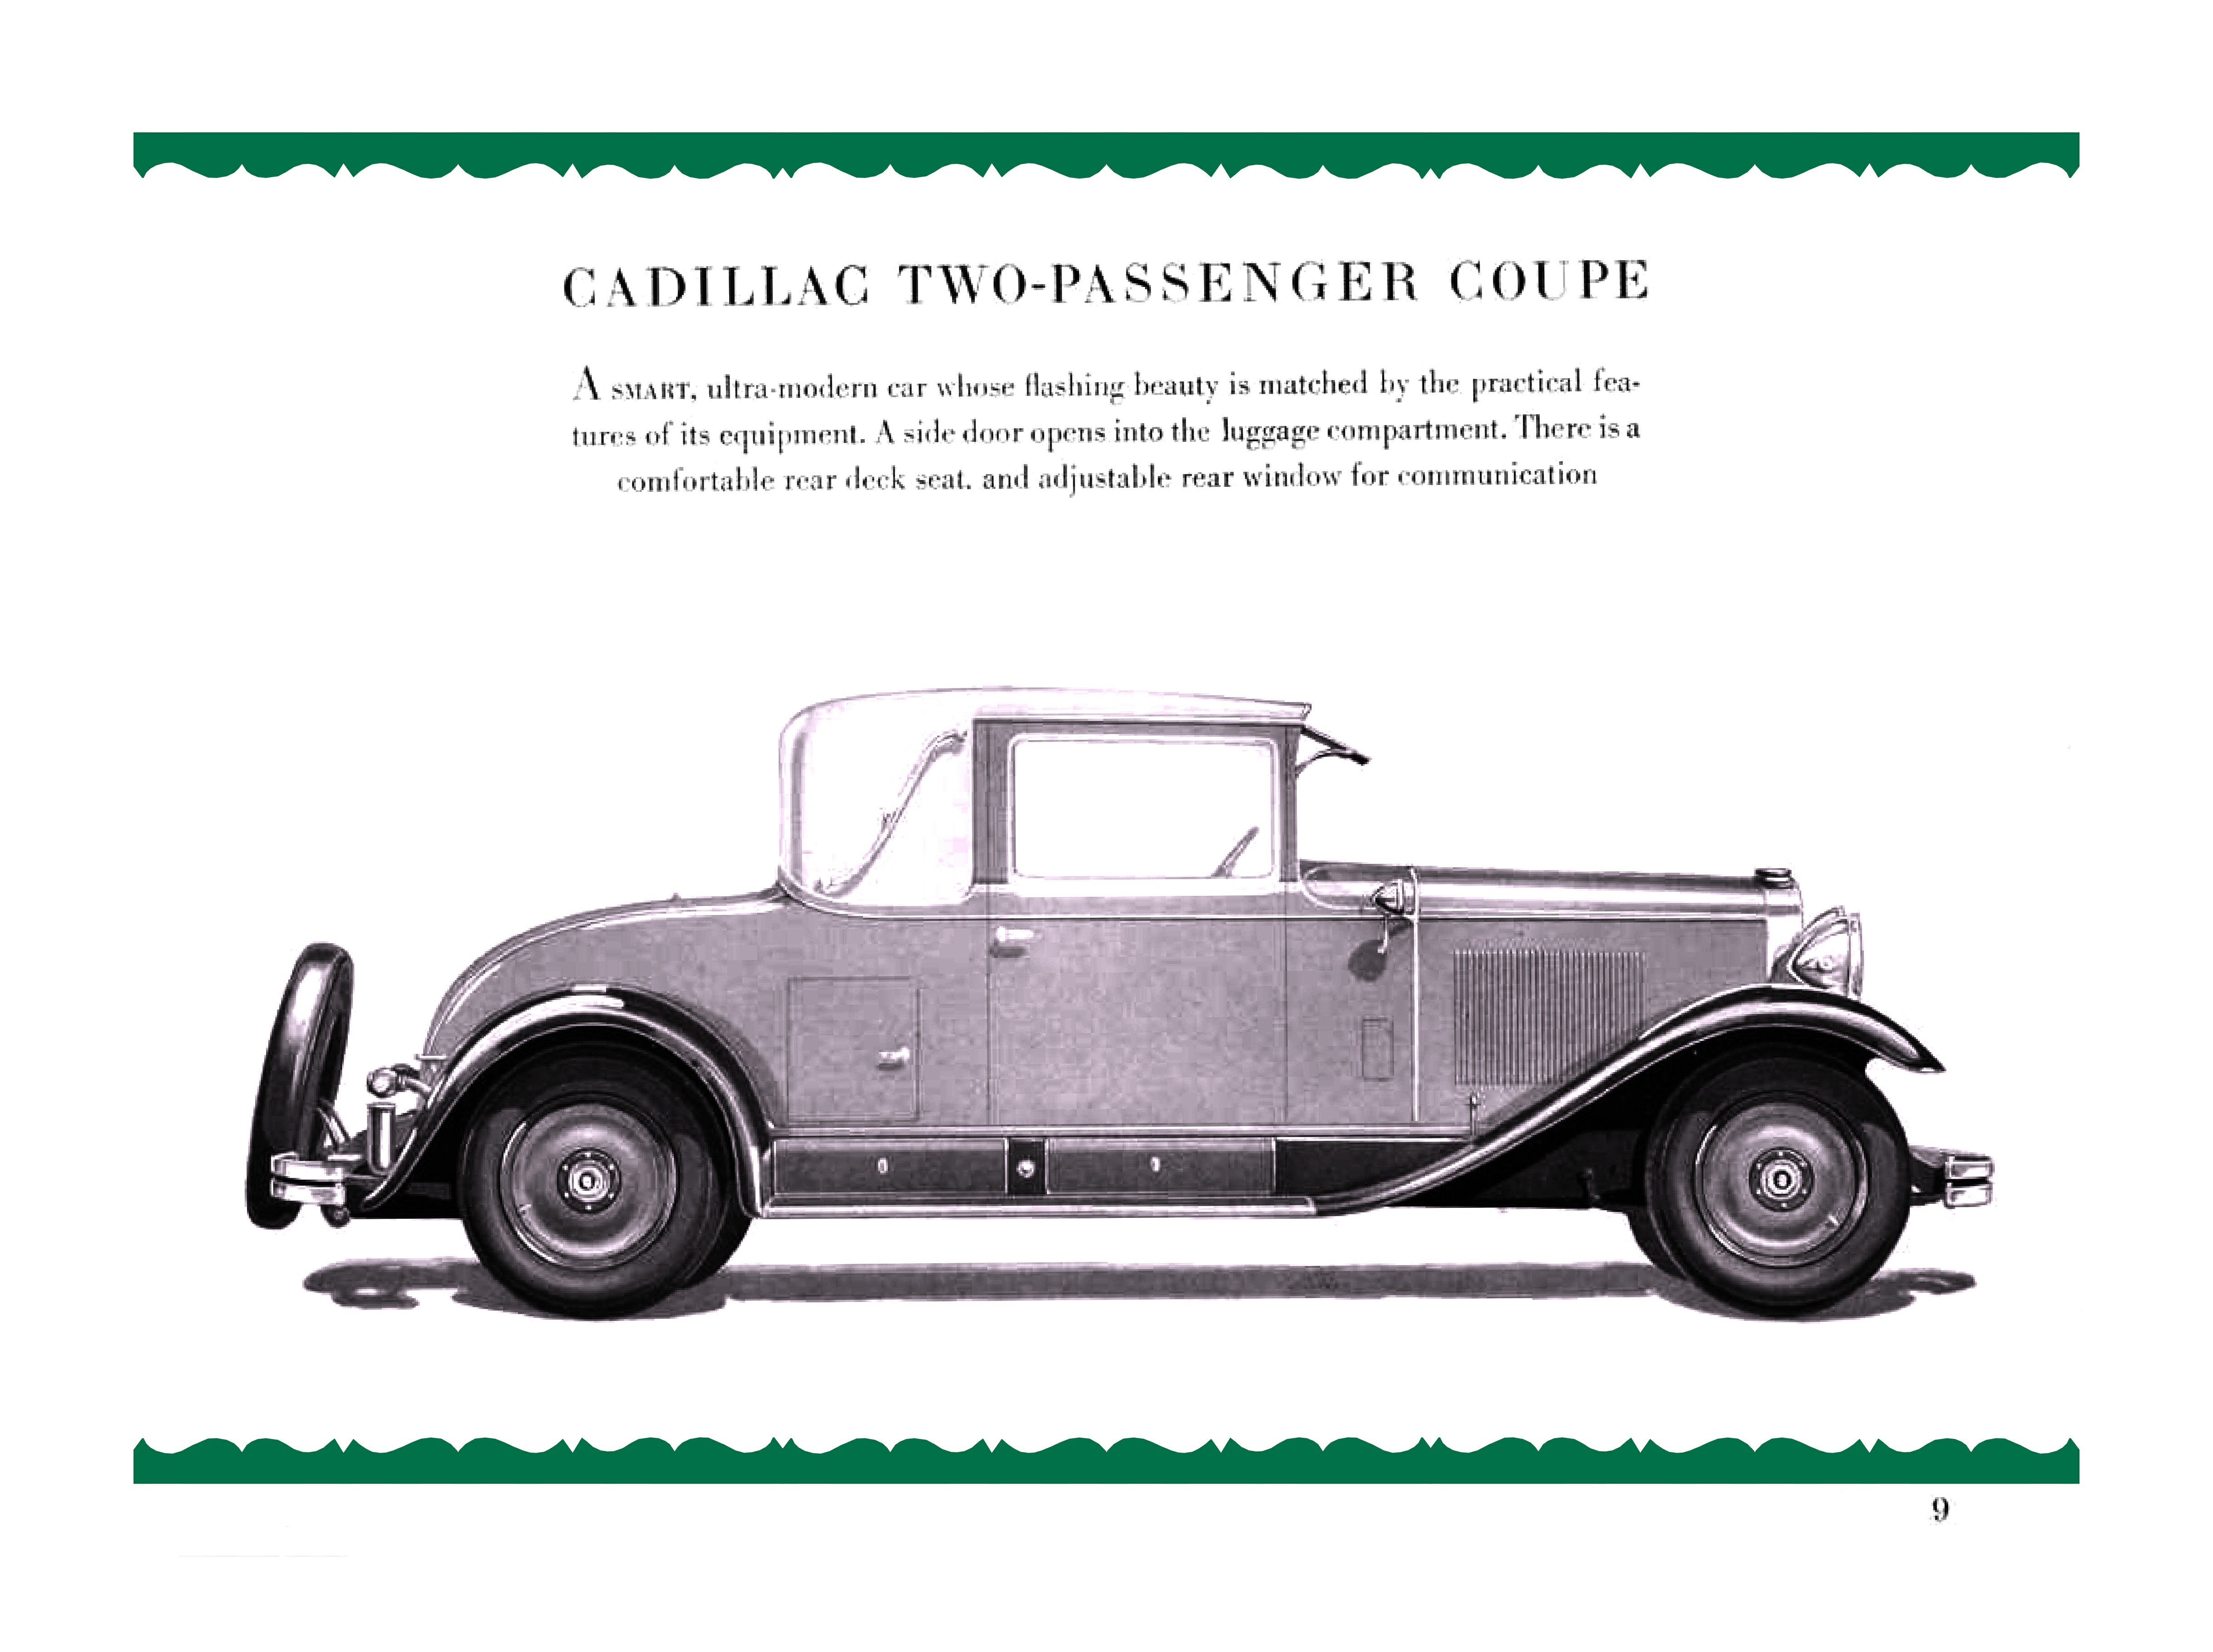 http://www.autominded.net/brochure/cadillac/Cadillac%201928%2010.jpg